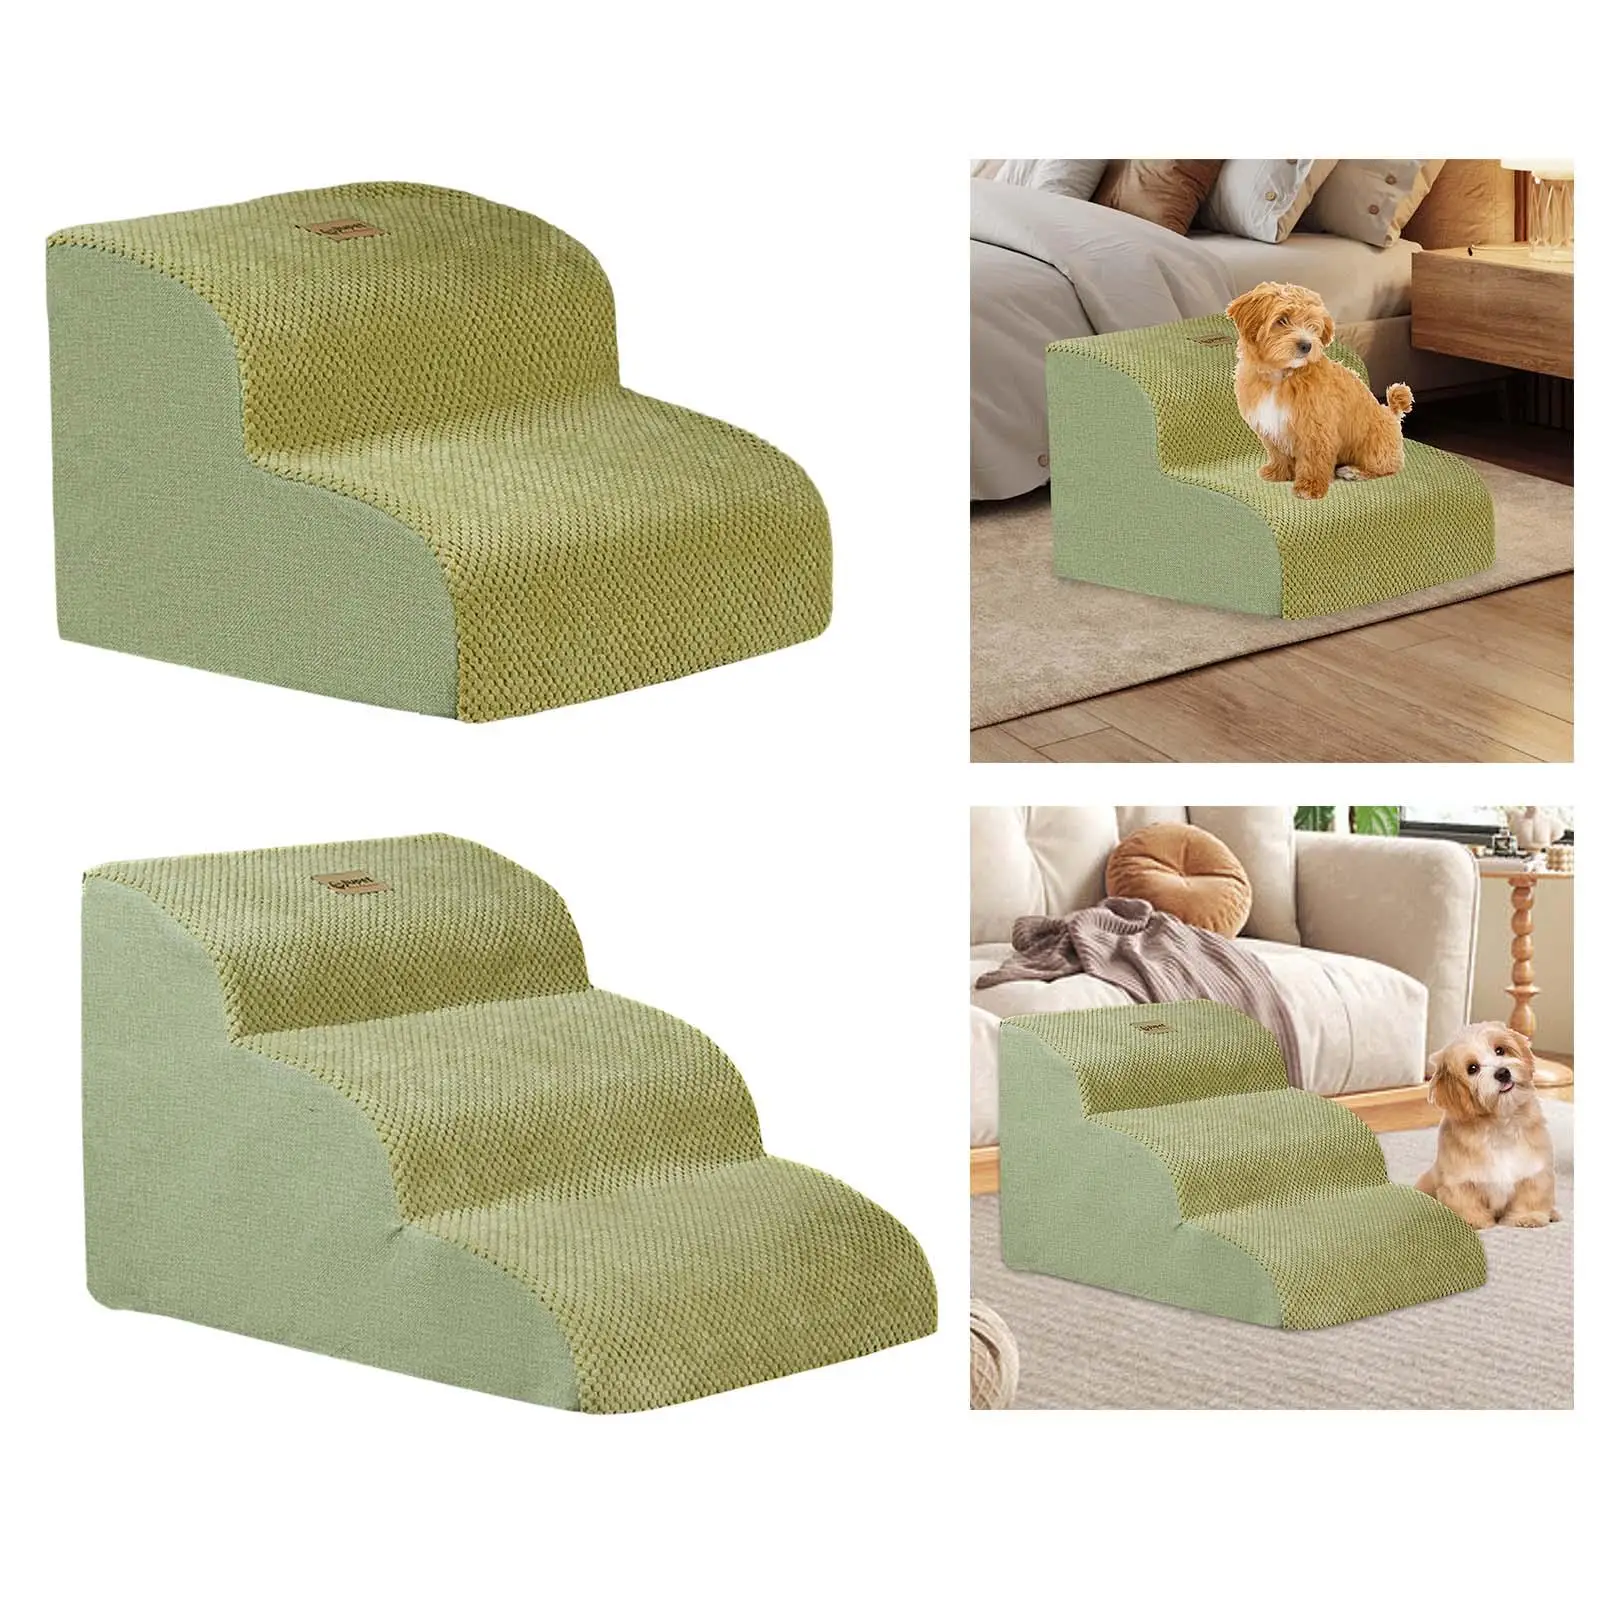 Dog Stairs Nonslip with Removable Washable Cover Pet Stairs for Small Dogs Pet Foam Ladder for Tall Bed Couch Home Play SUV